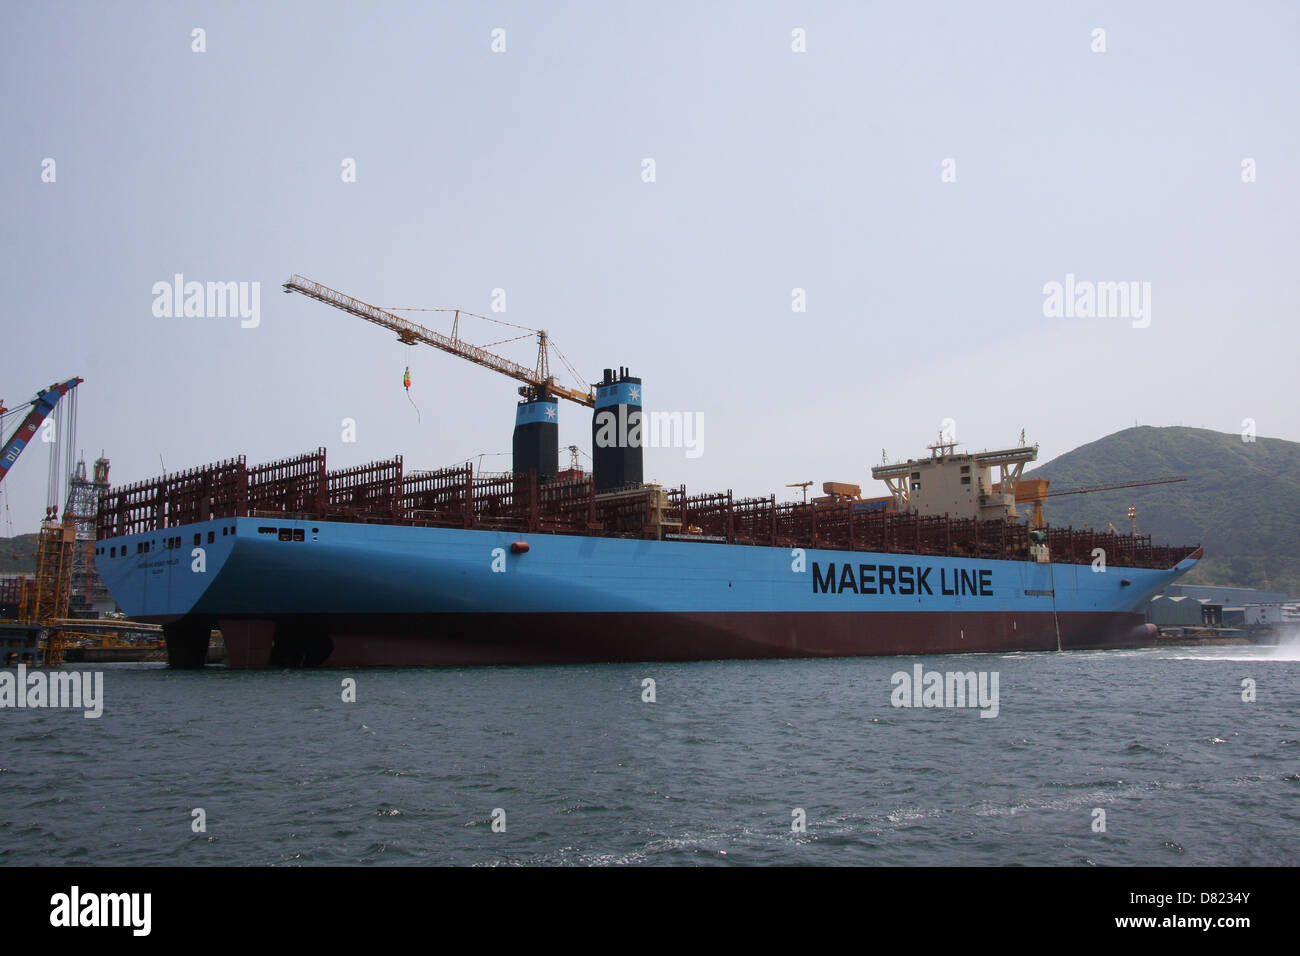 Maersk McKinney Moller the first 18,000 teu Triple-E container ship photographed while fitting out at DSME shipyard Stock Photo